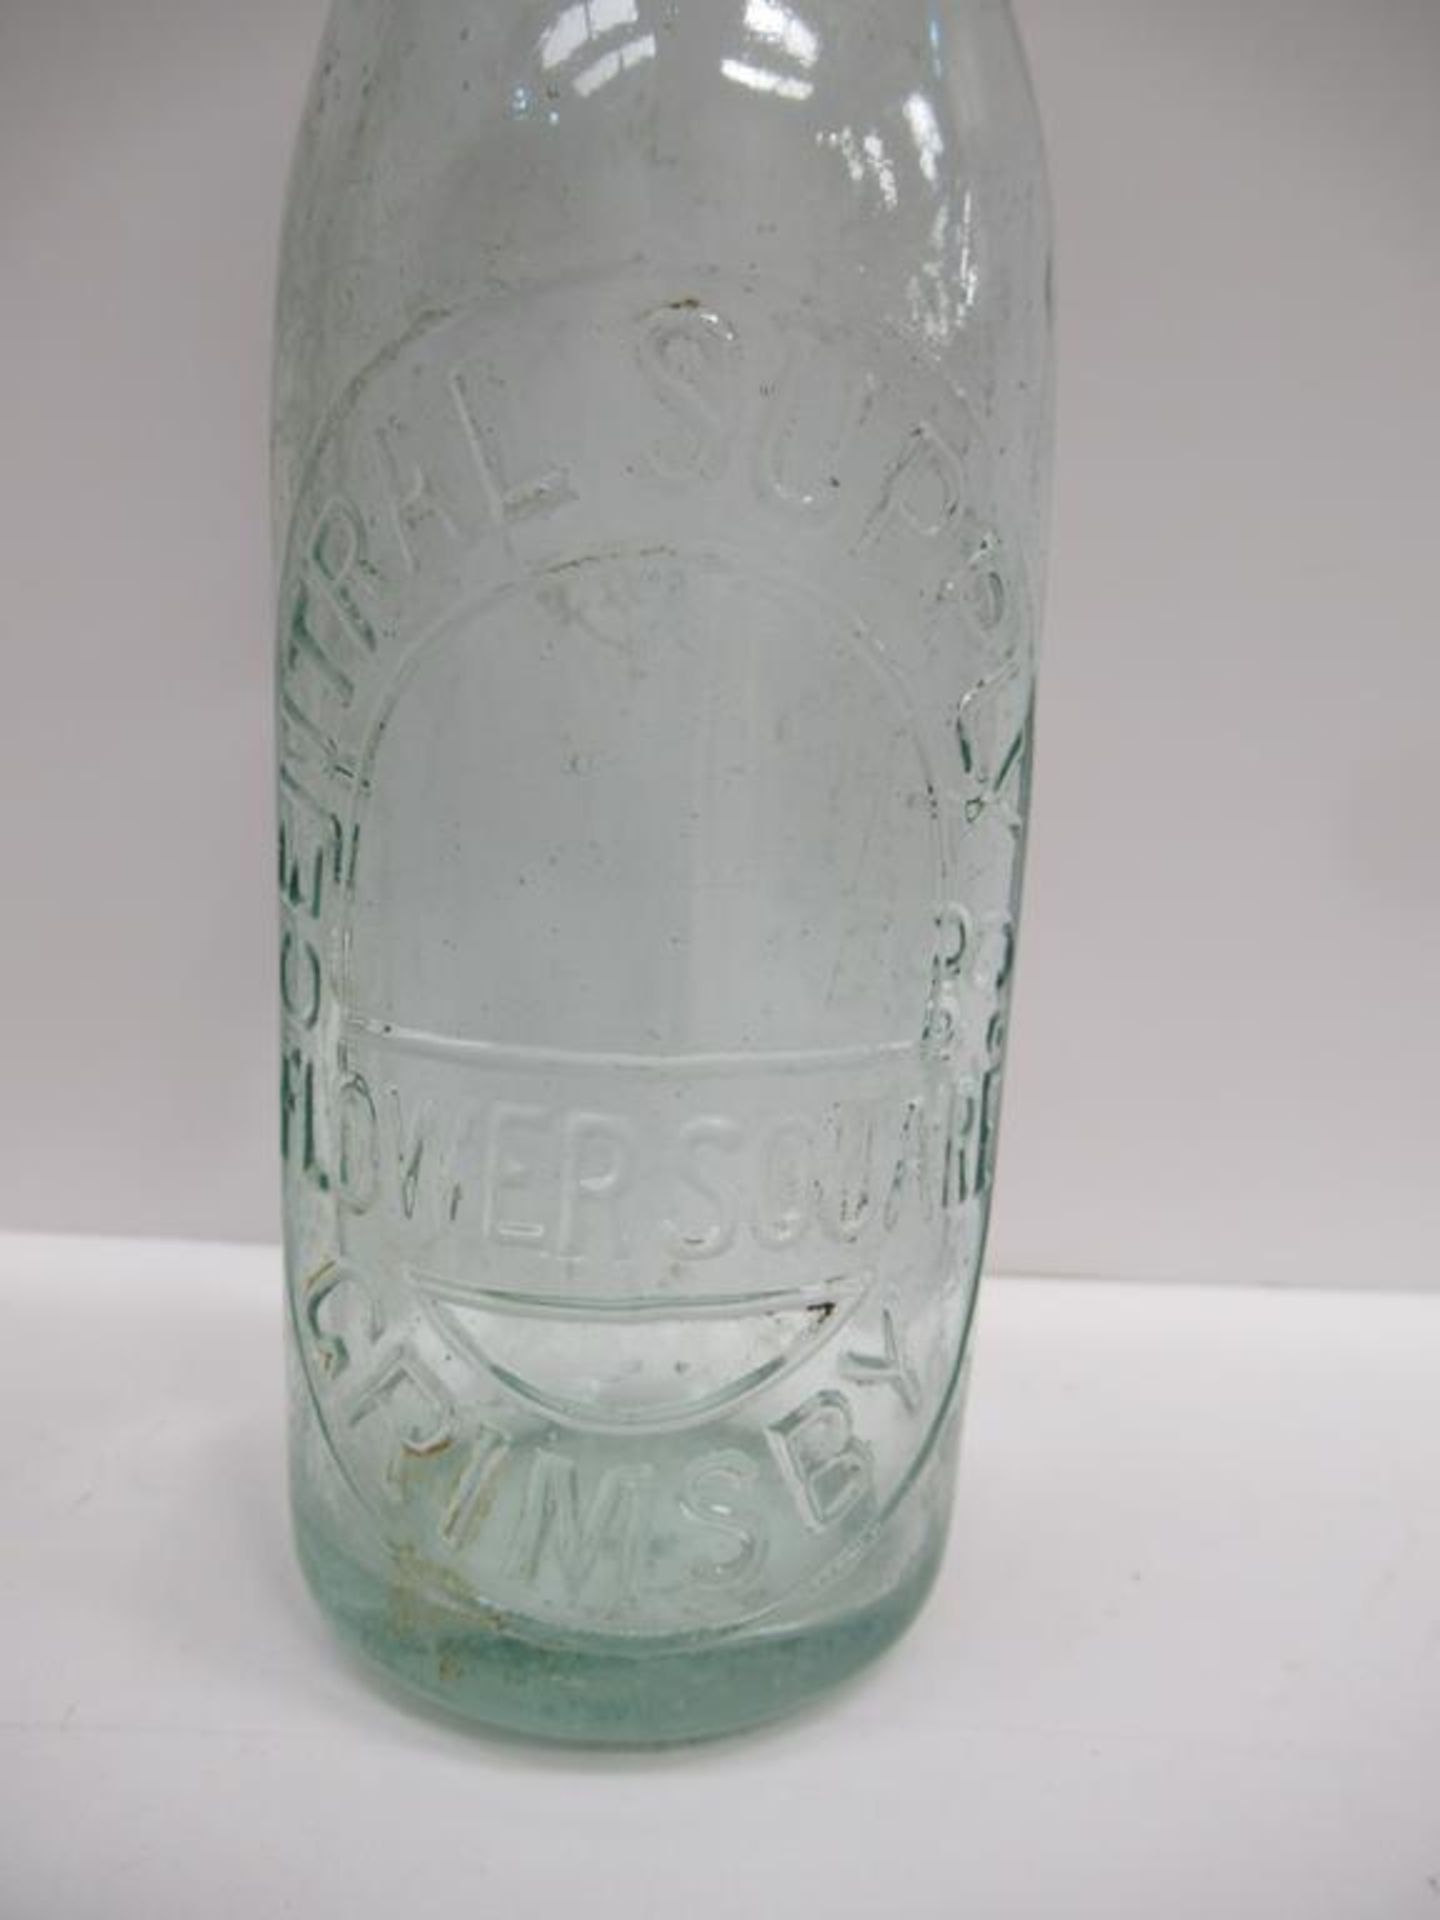 4x Grimsby Central Supply Co (2), Warwicks Cash Stores (1) and H.J. Curry bottles - Image 9 of 13